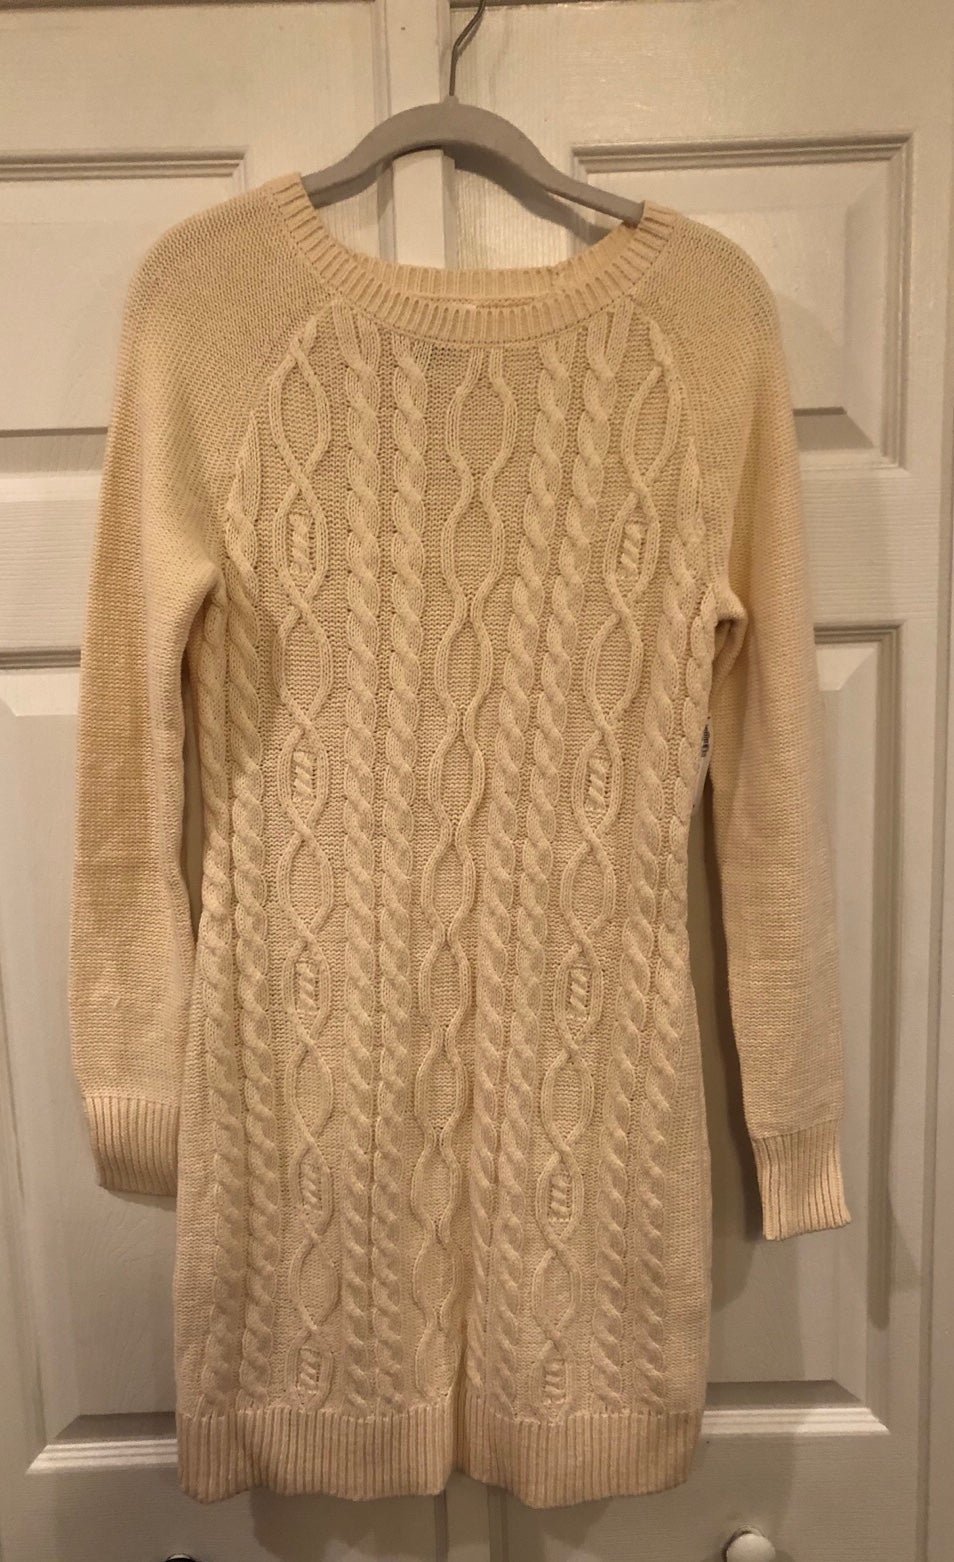 good price NWT - Cream Cable Knit Sweater Dress - Size Small kK7cCIjzI just for you